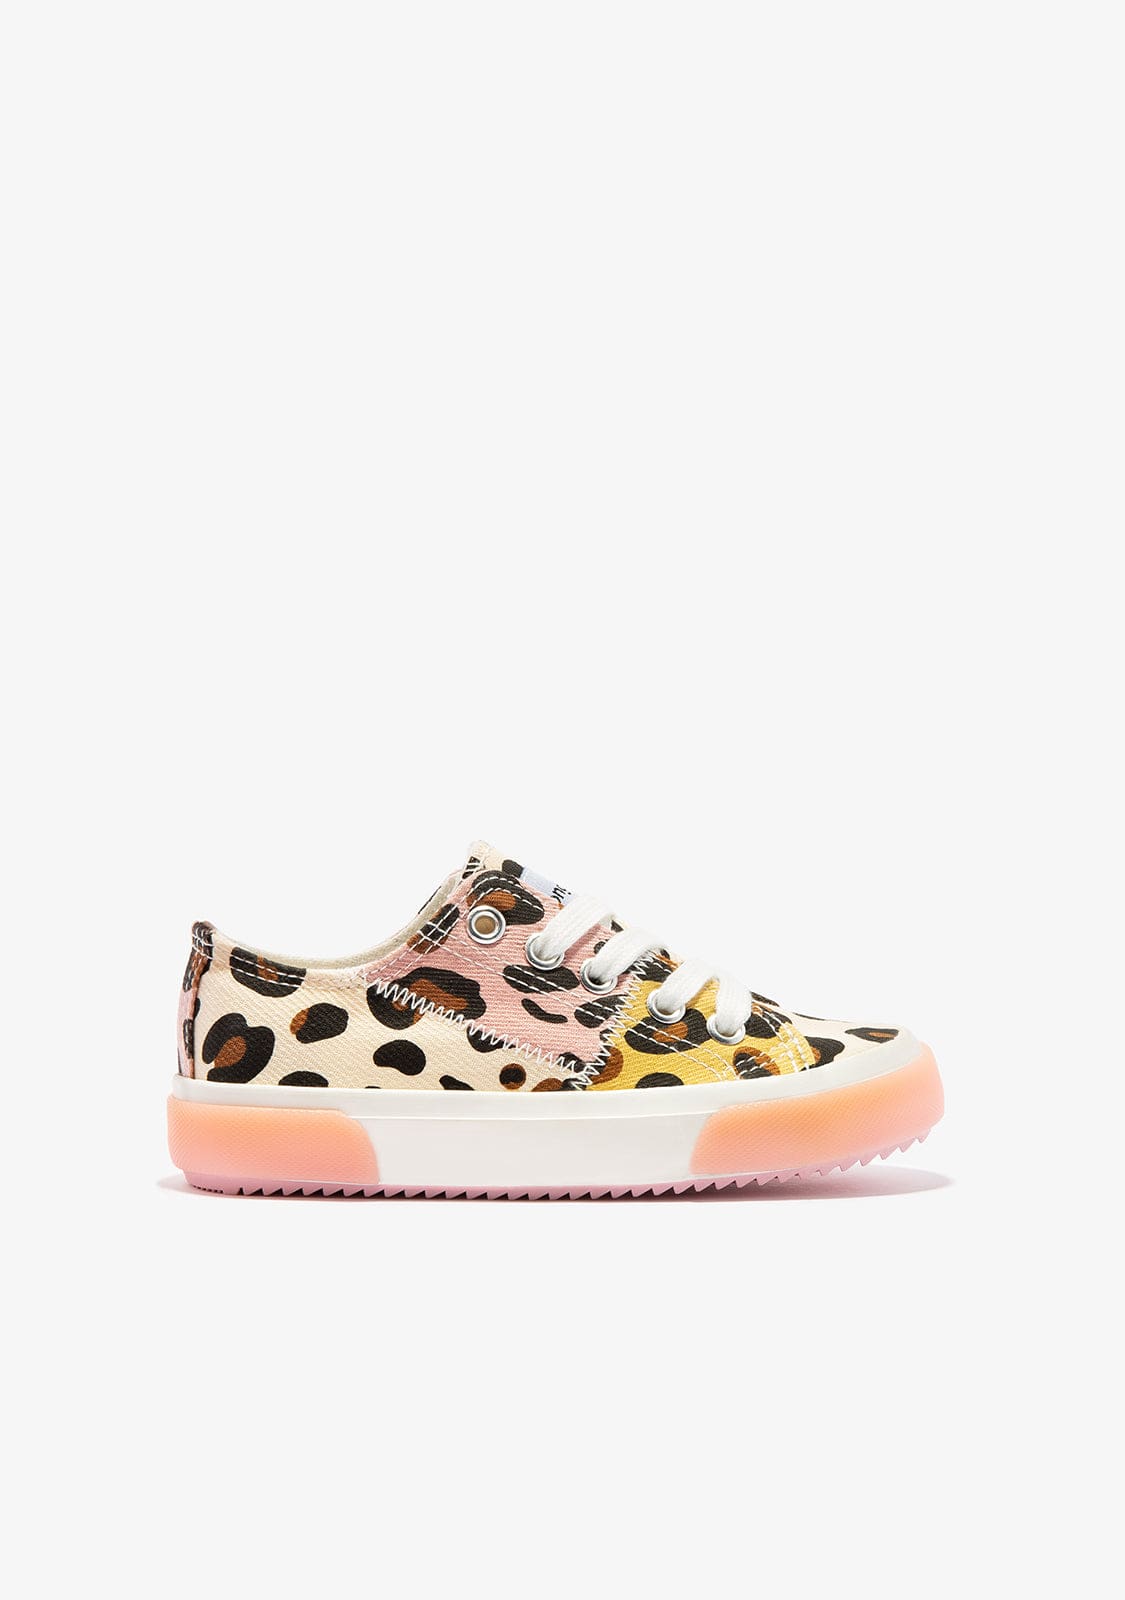 CONGUITOS Shoes Girl's Leo Print Sneakers